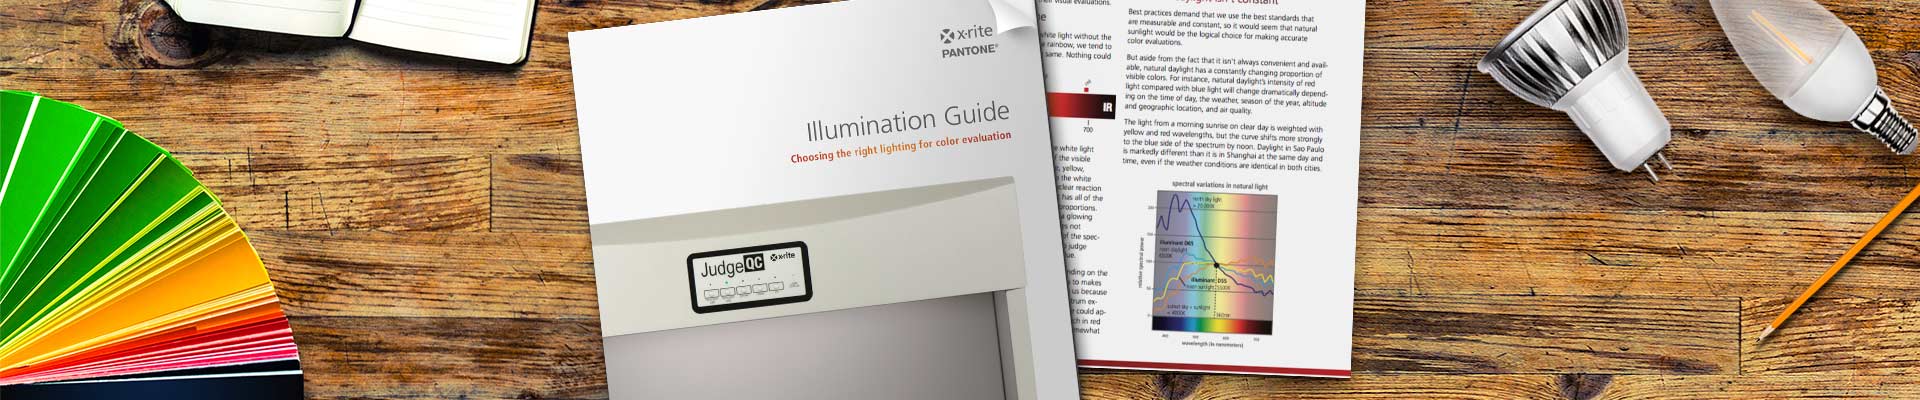 Illumination Guide: Choosing the right lighting for color evaluationß